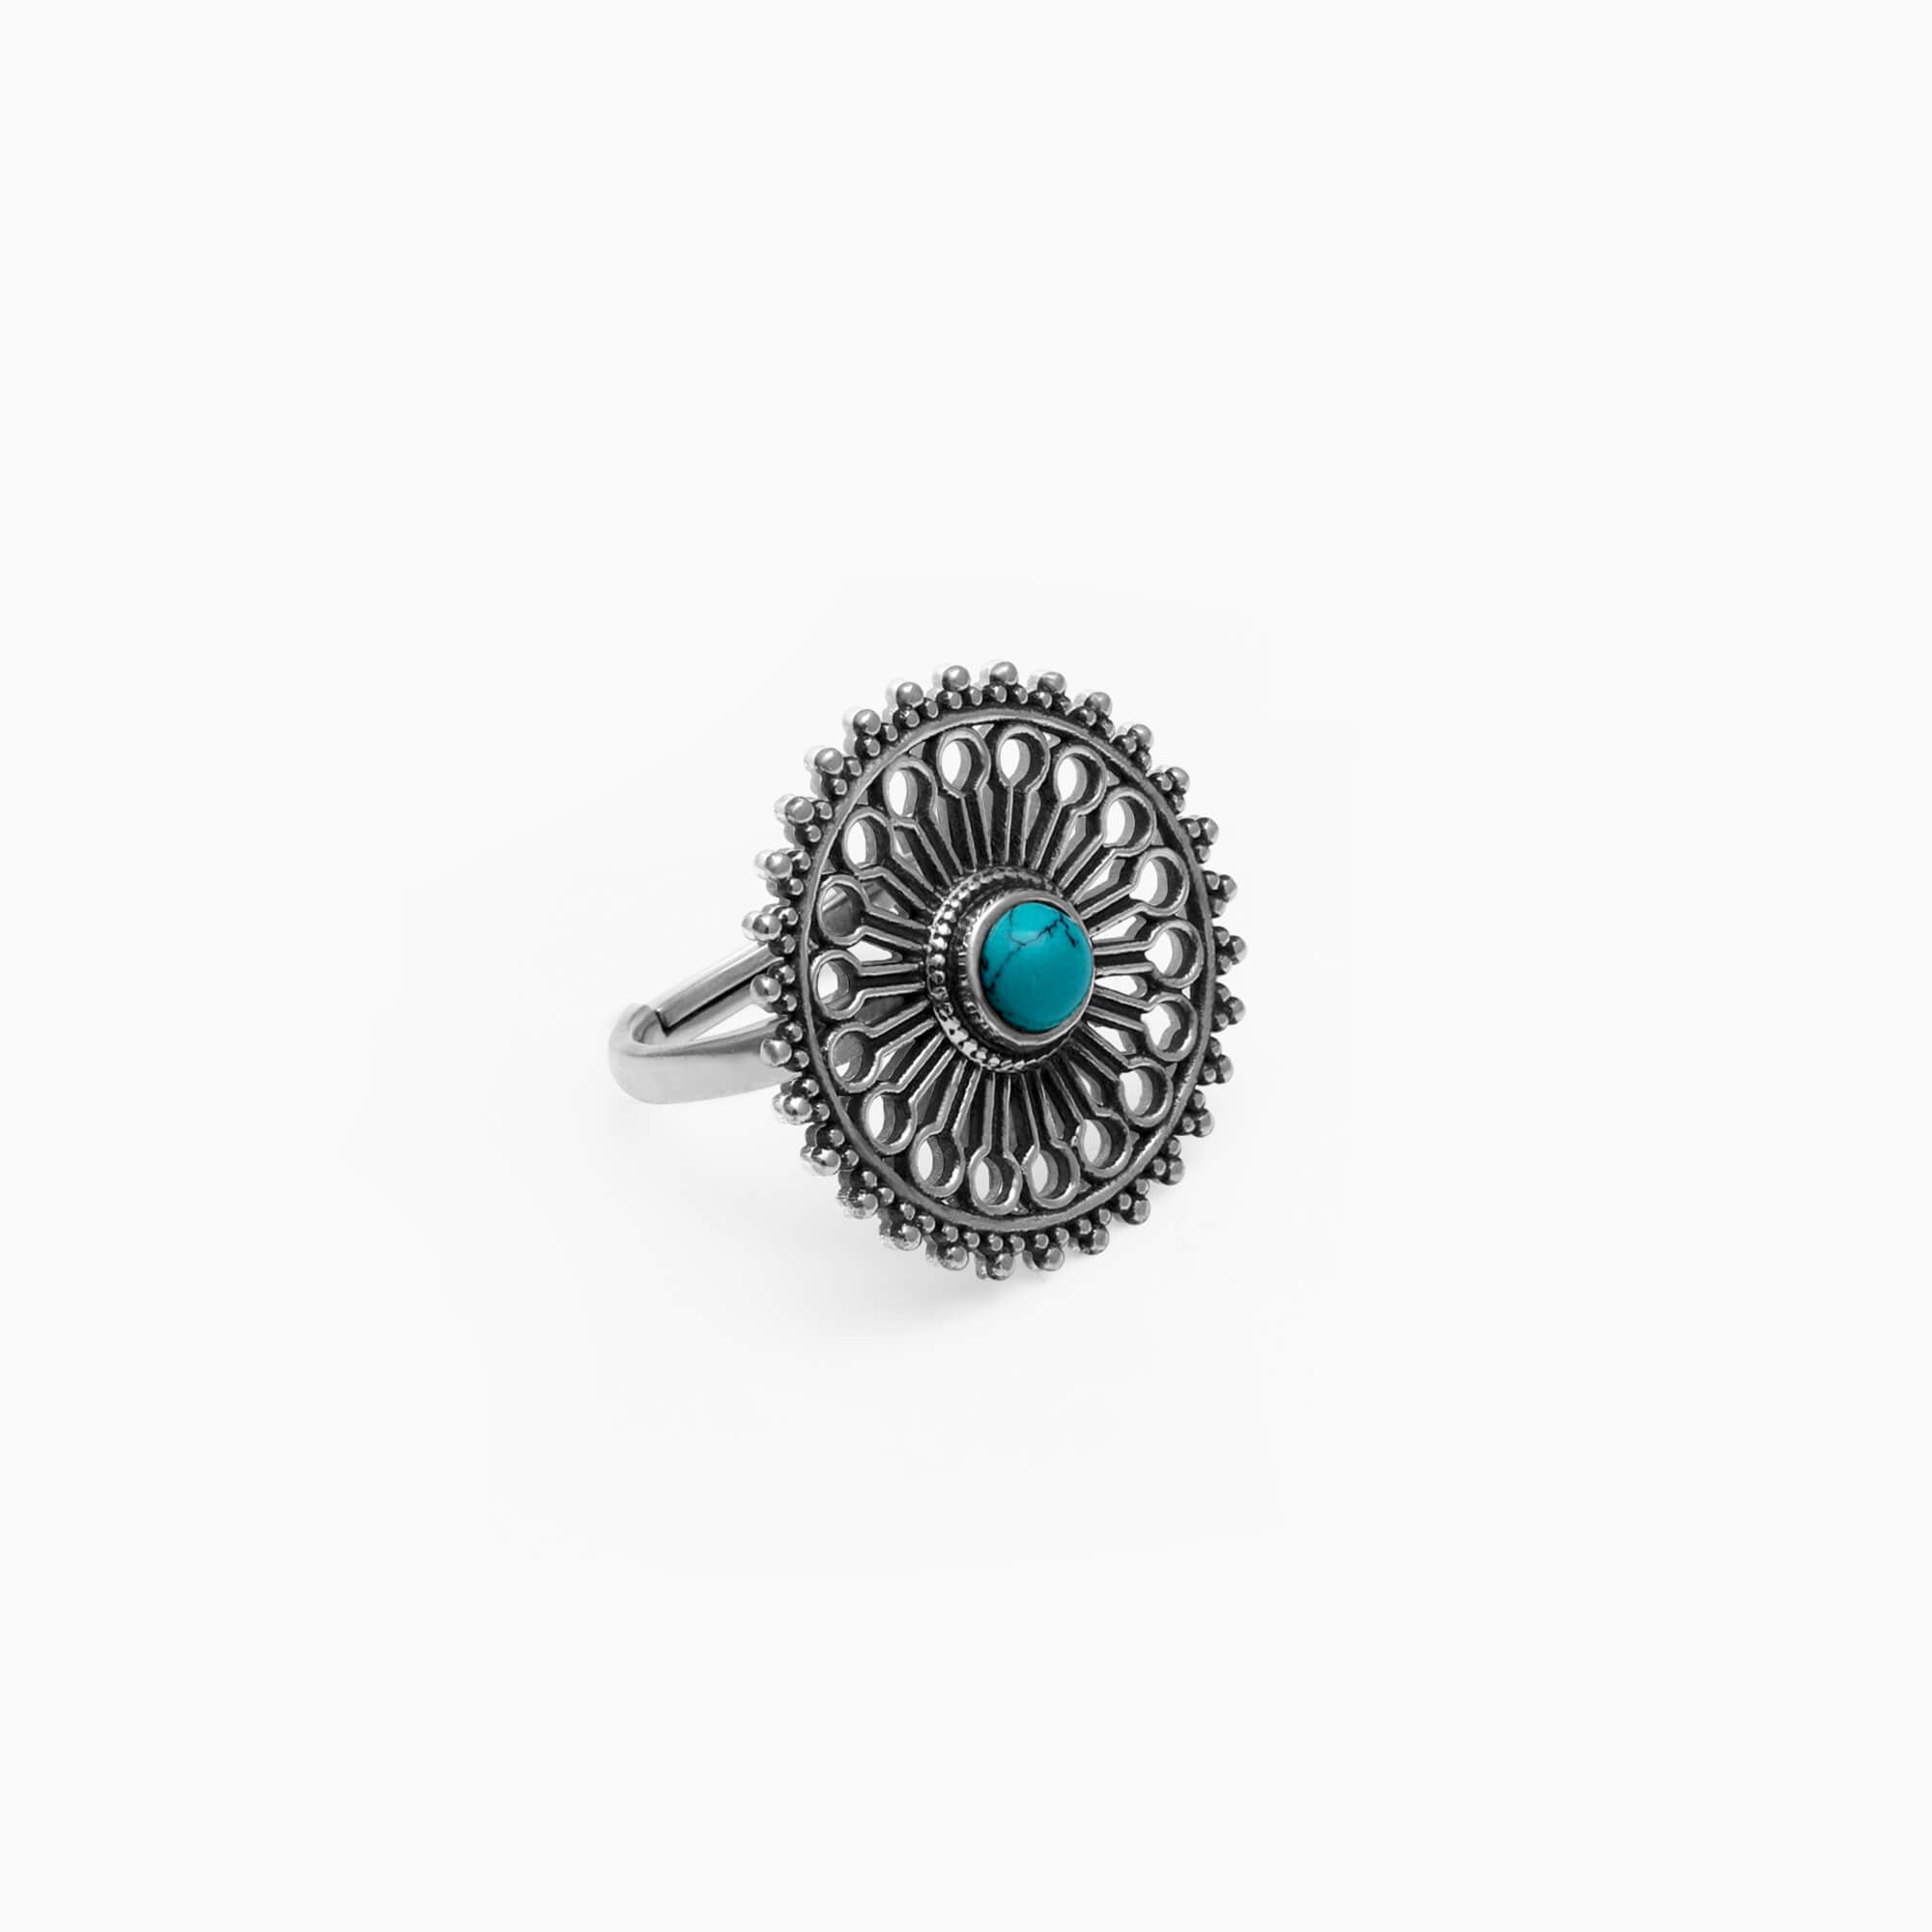 Antler and Turquoise ring – Japanese Melody